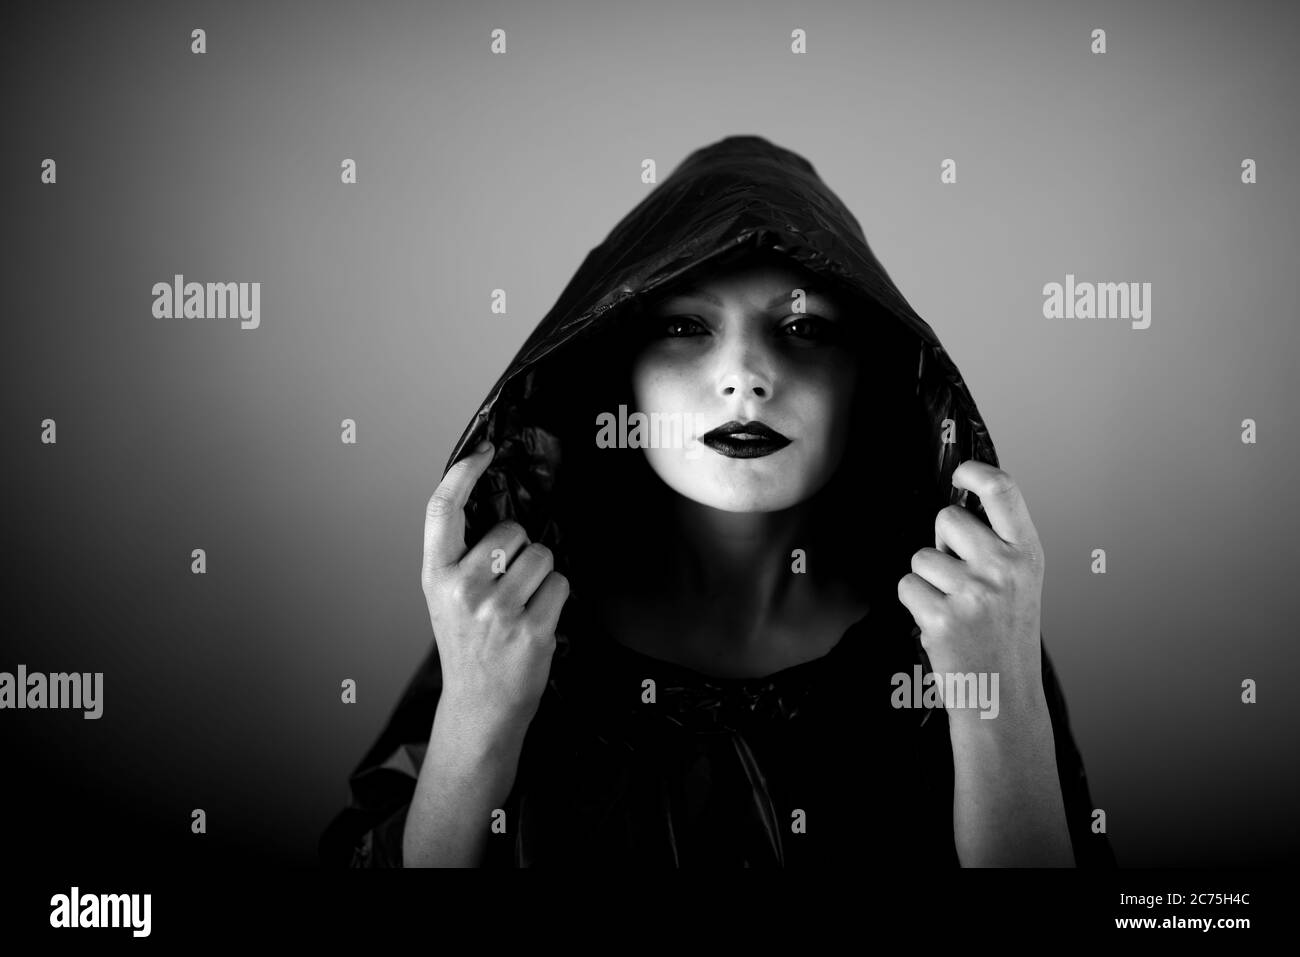 Lady in raincoat Black and White Stock Photos & Images - Alamy